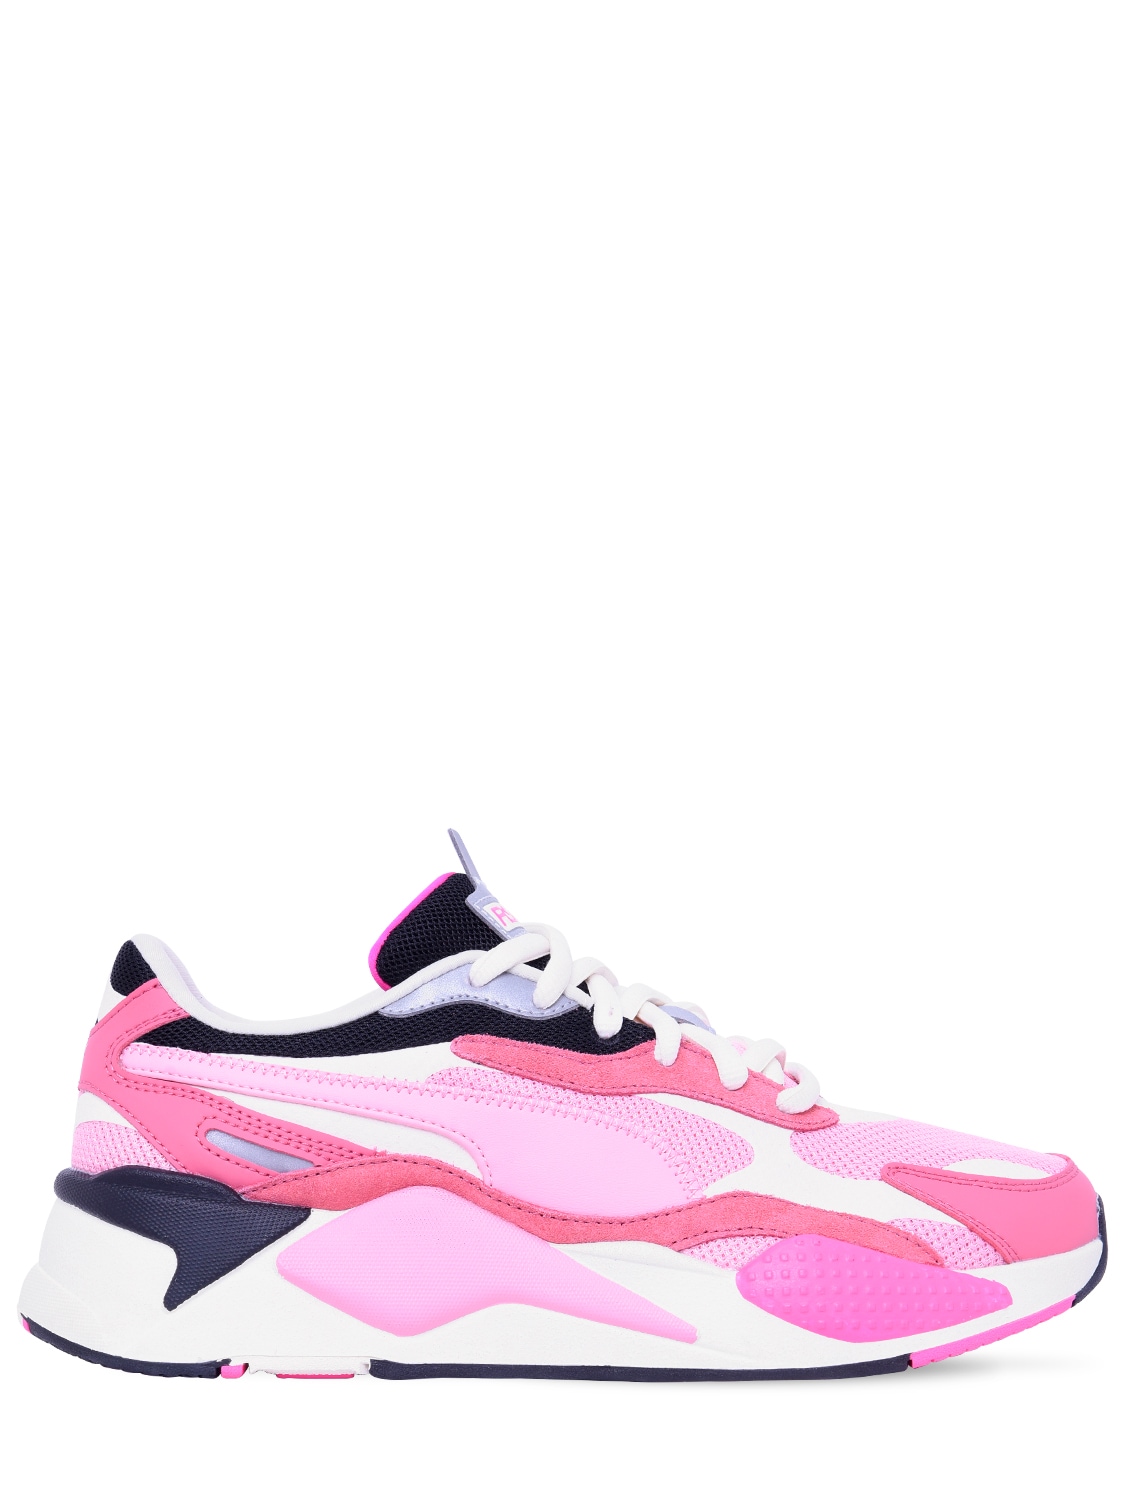 Puma Rs-x3 Puzzle Sneakers In Pink,white | ModeSens